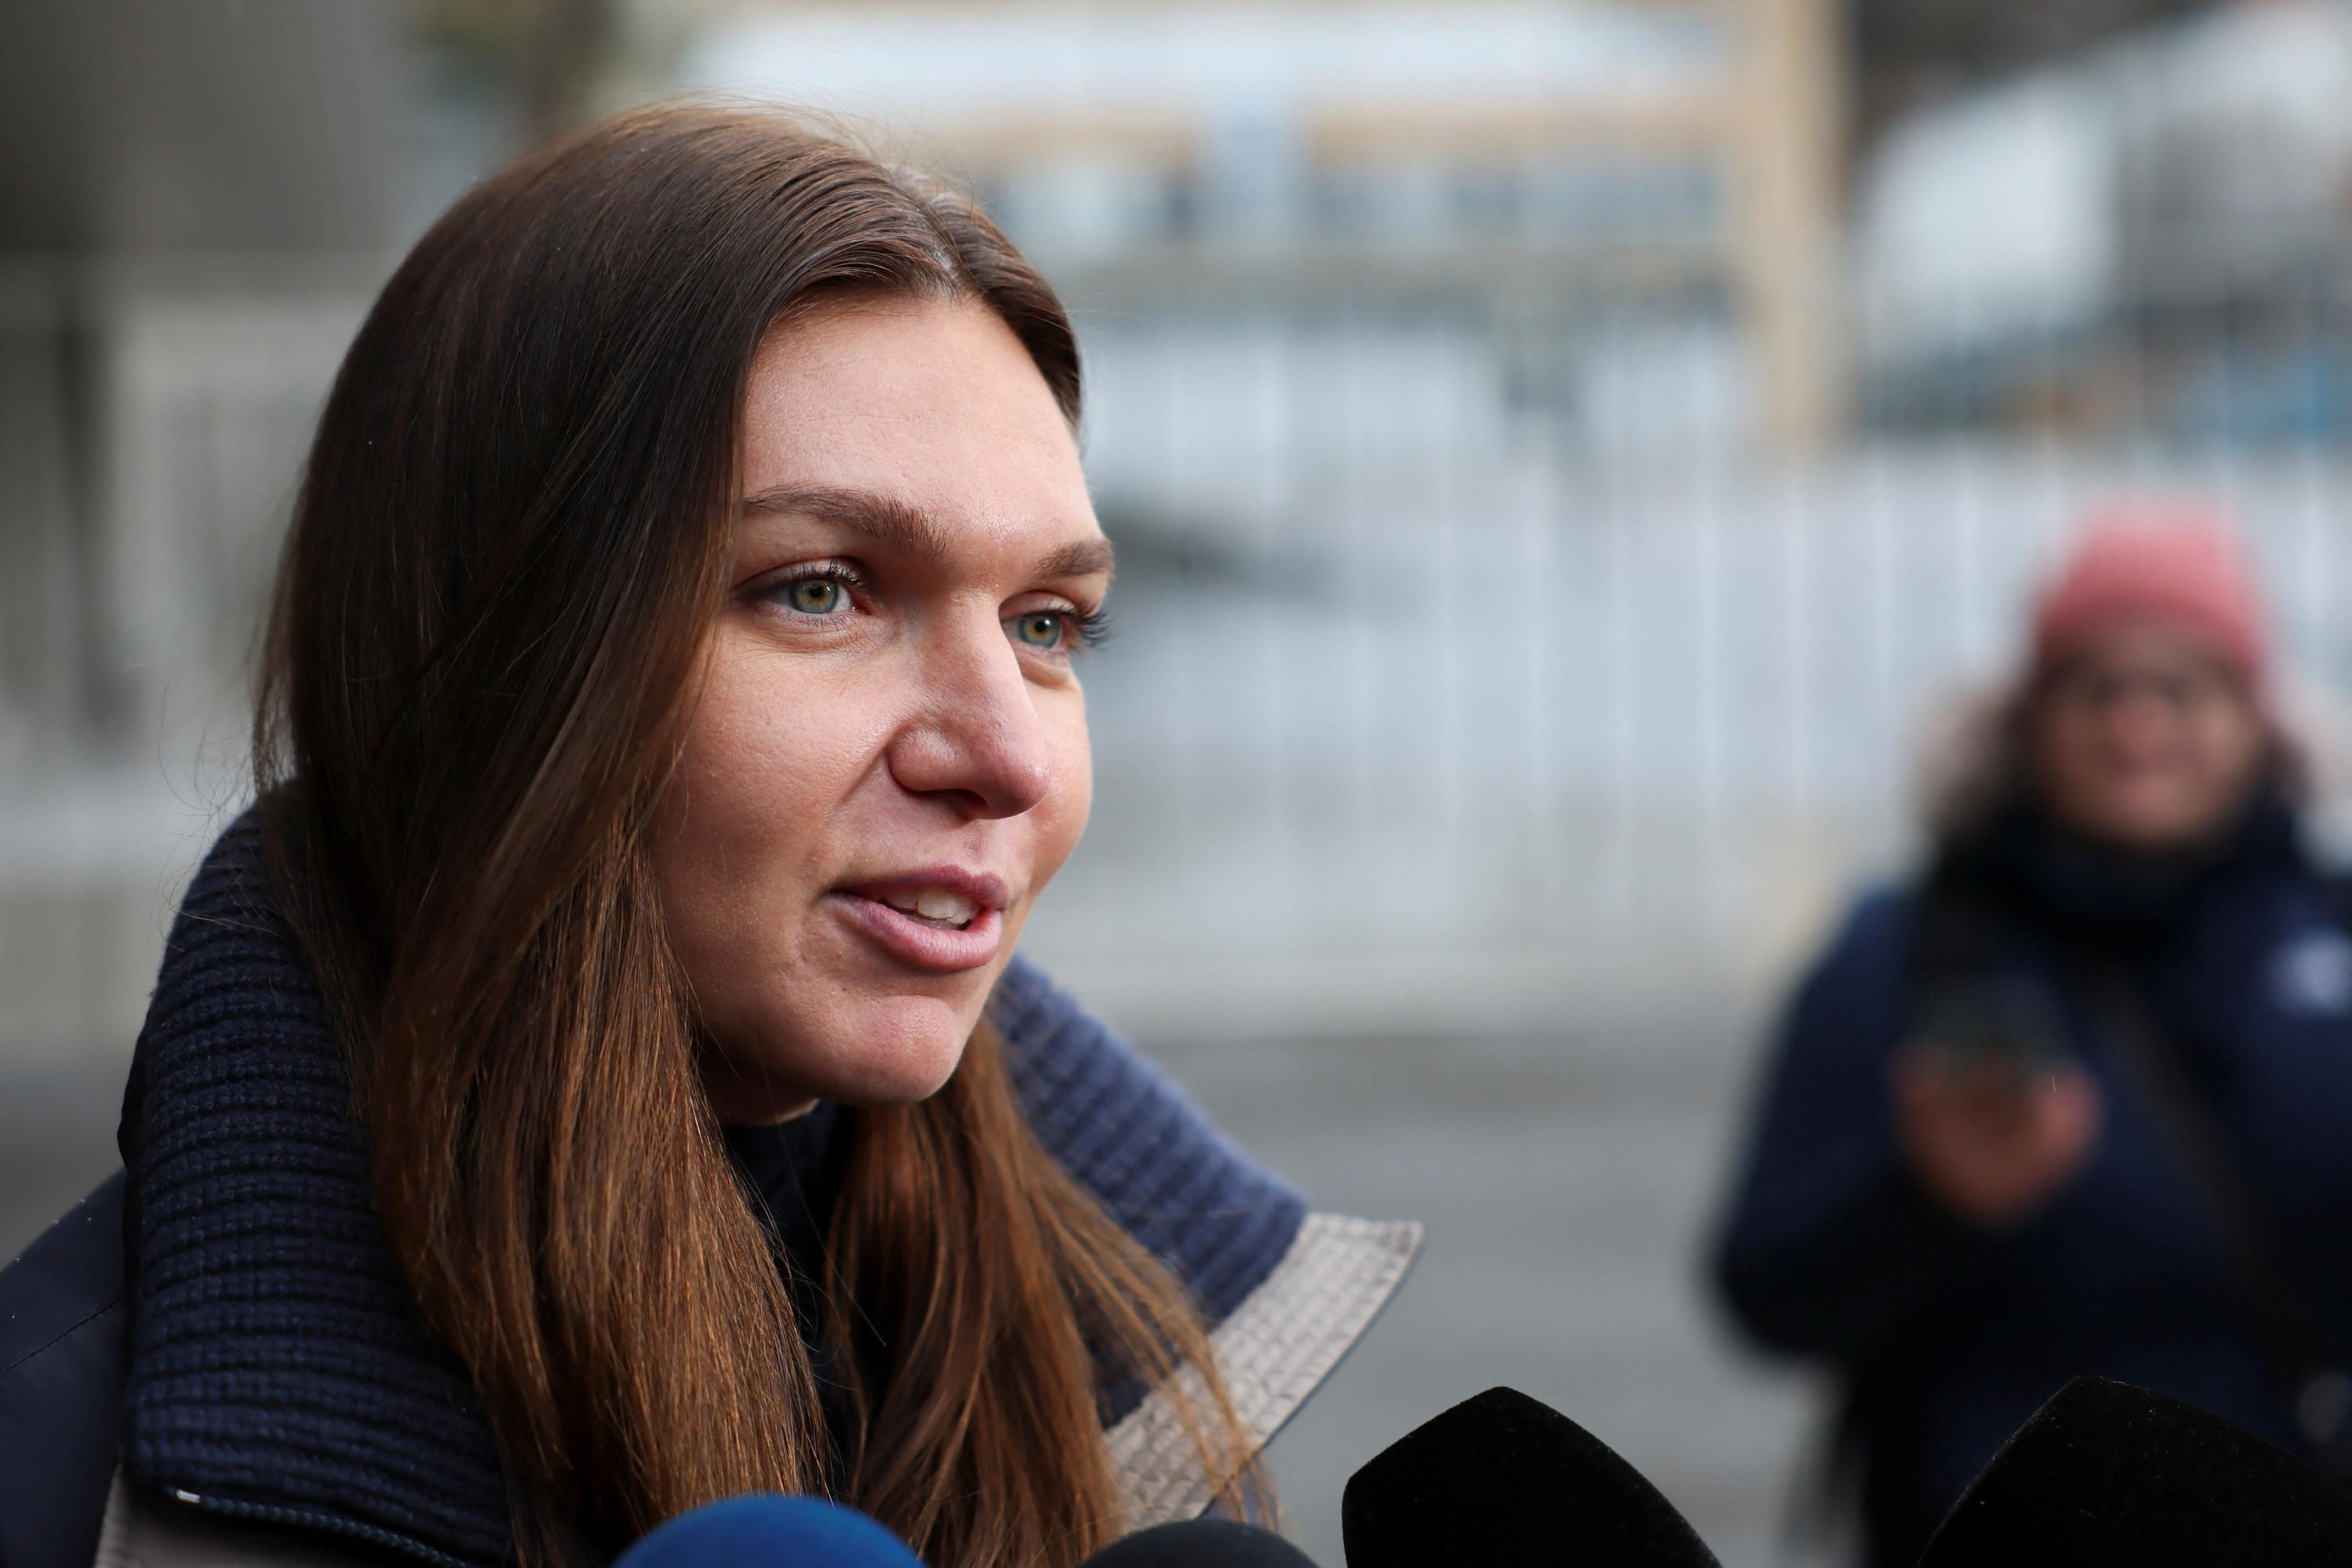 Doping: Simona Halep confident after her hearing before the CAS